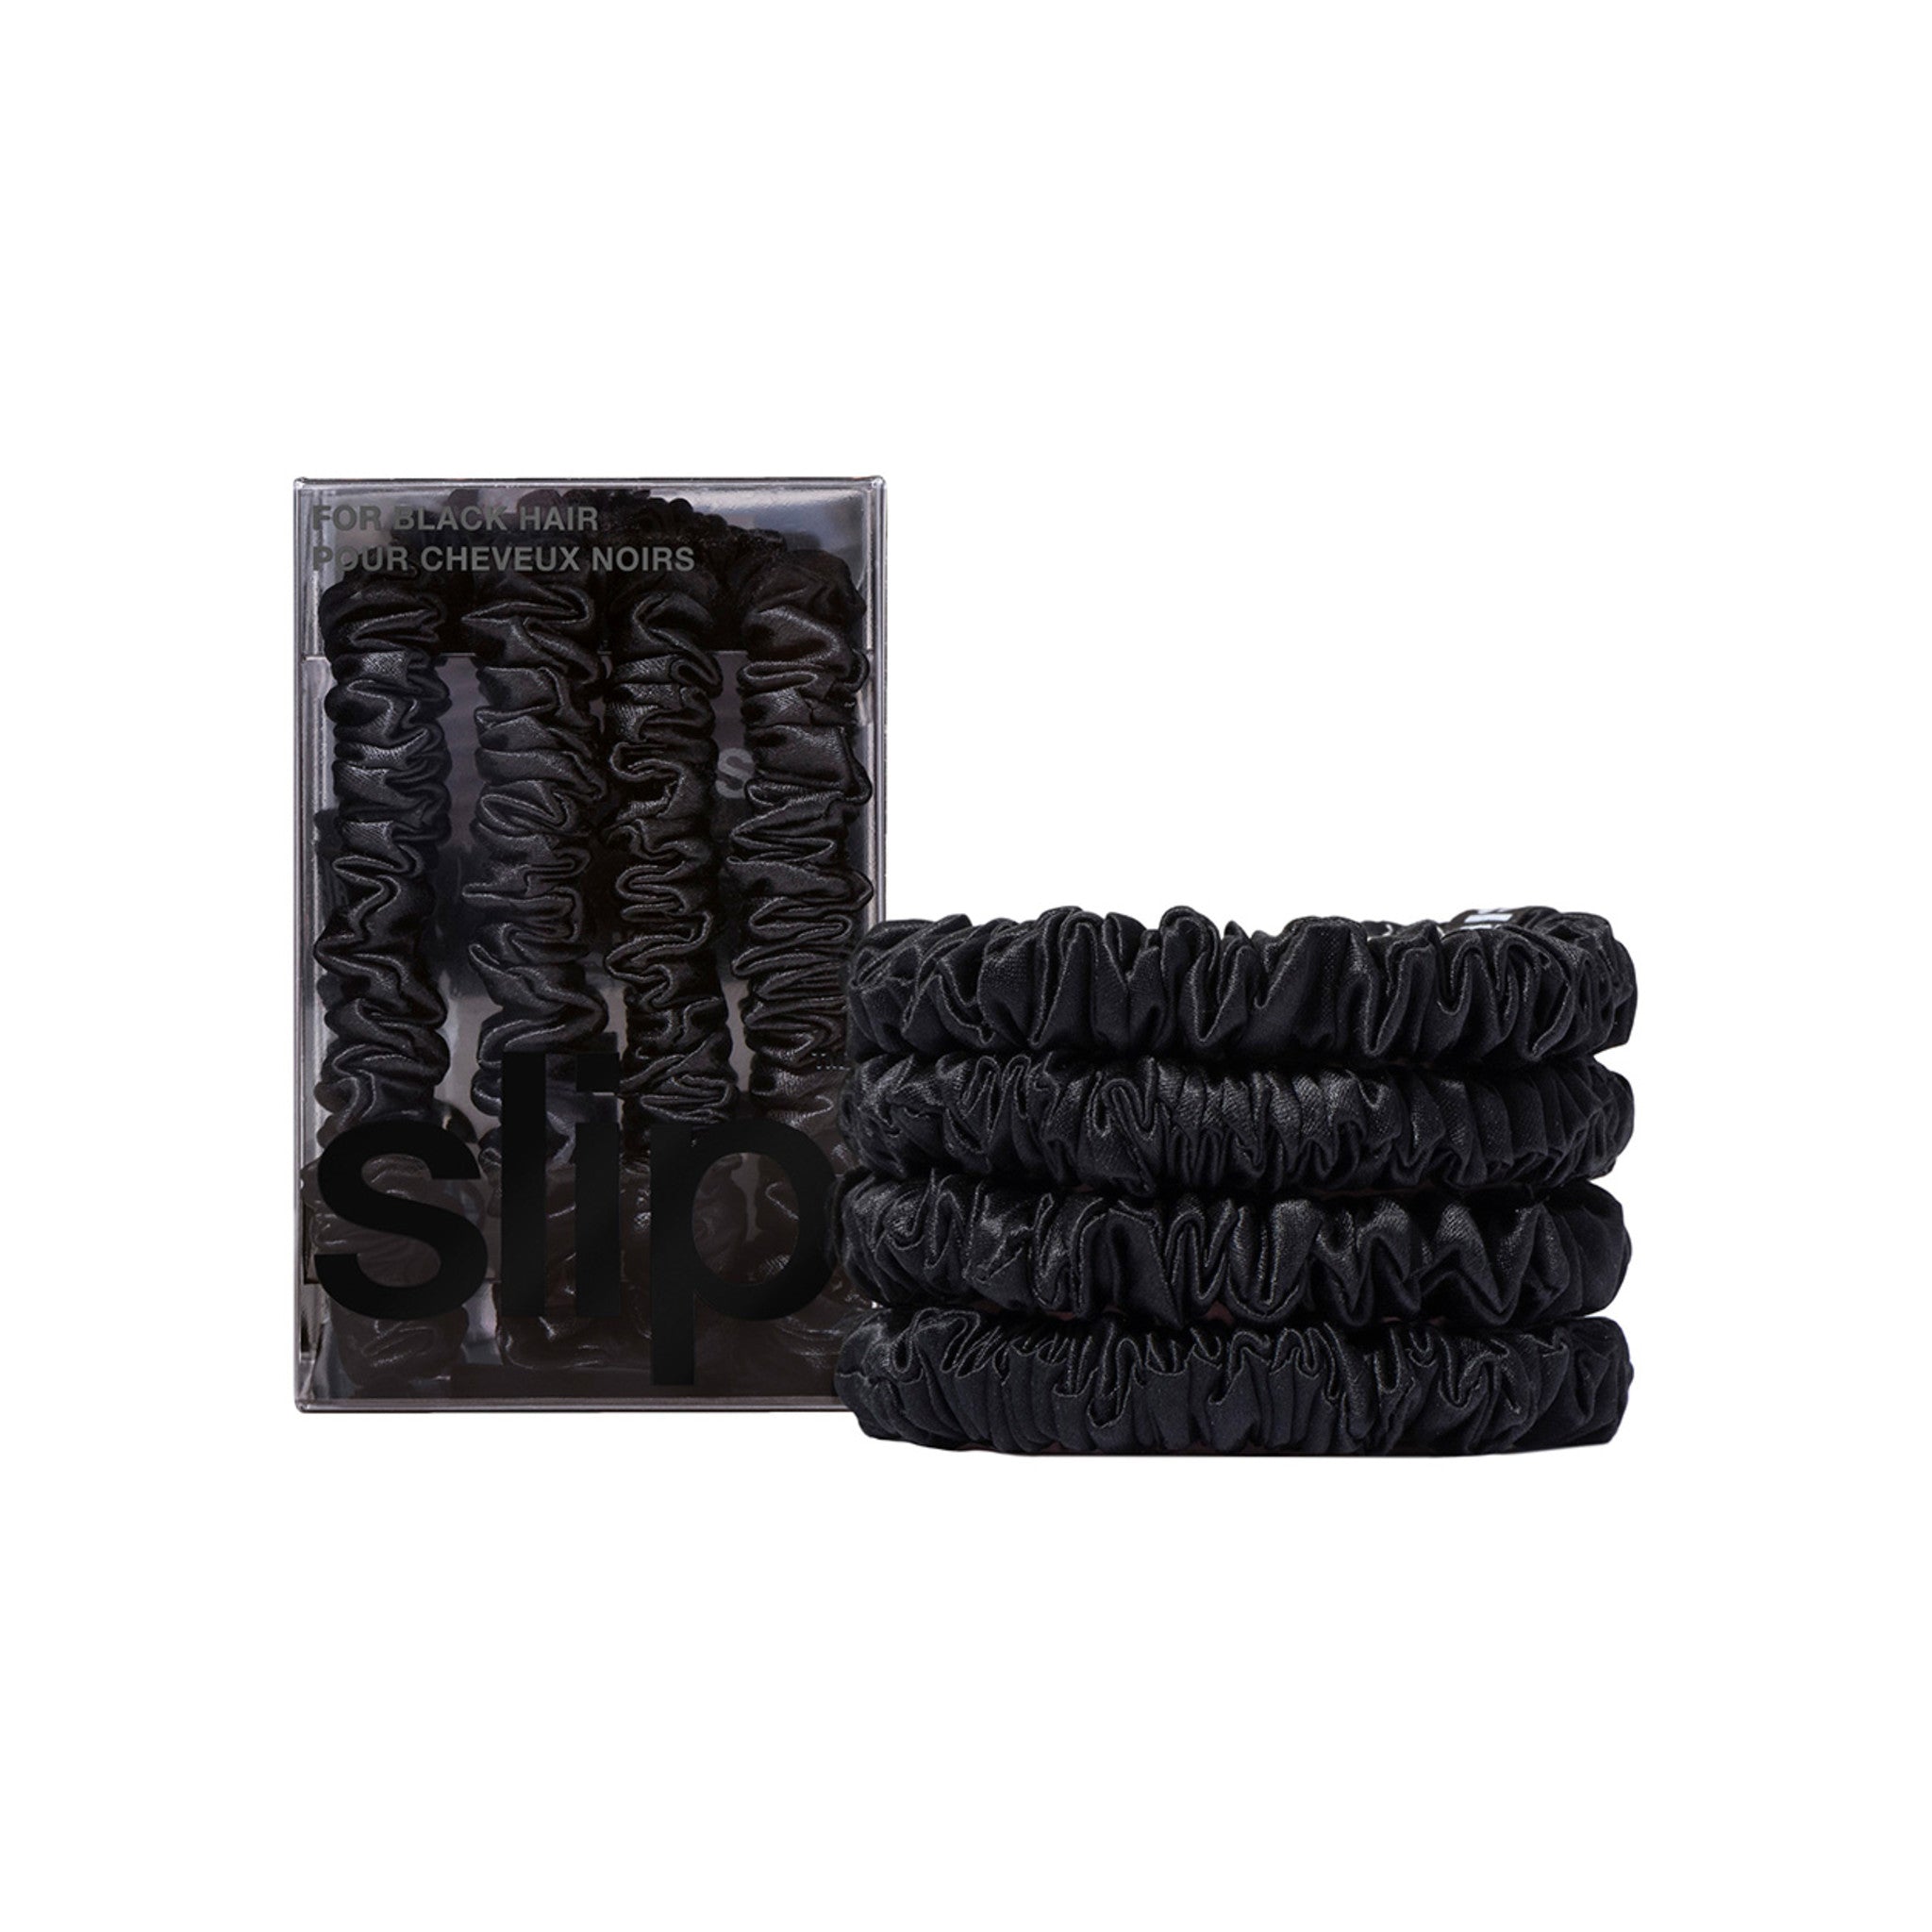 Slip Skinny Scrunchies Color/Shade variant: Black main image. This product is for black hair